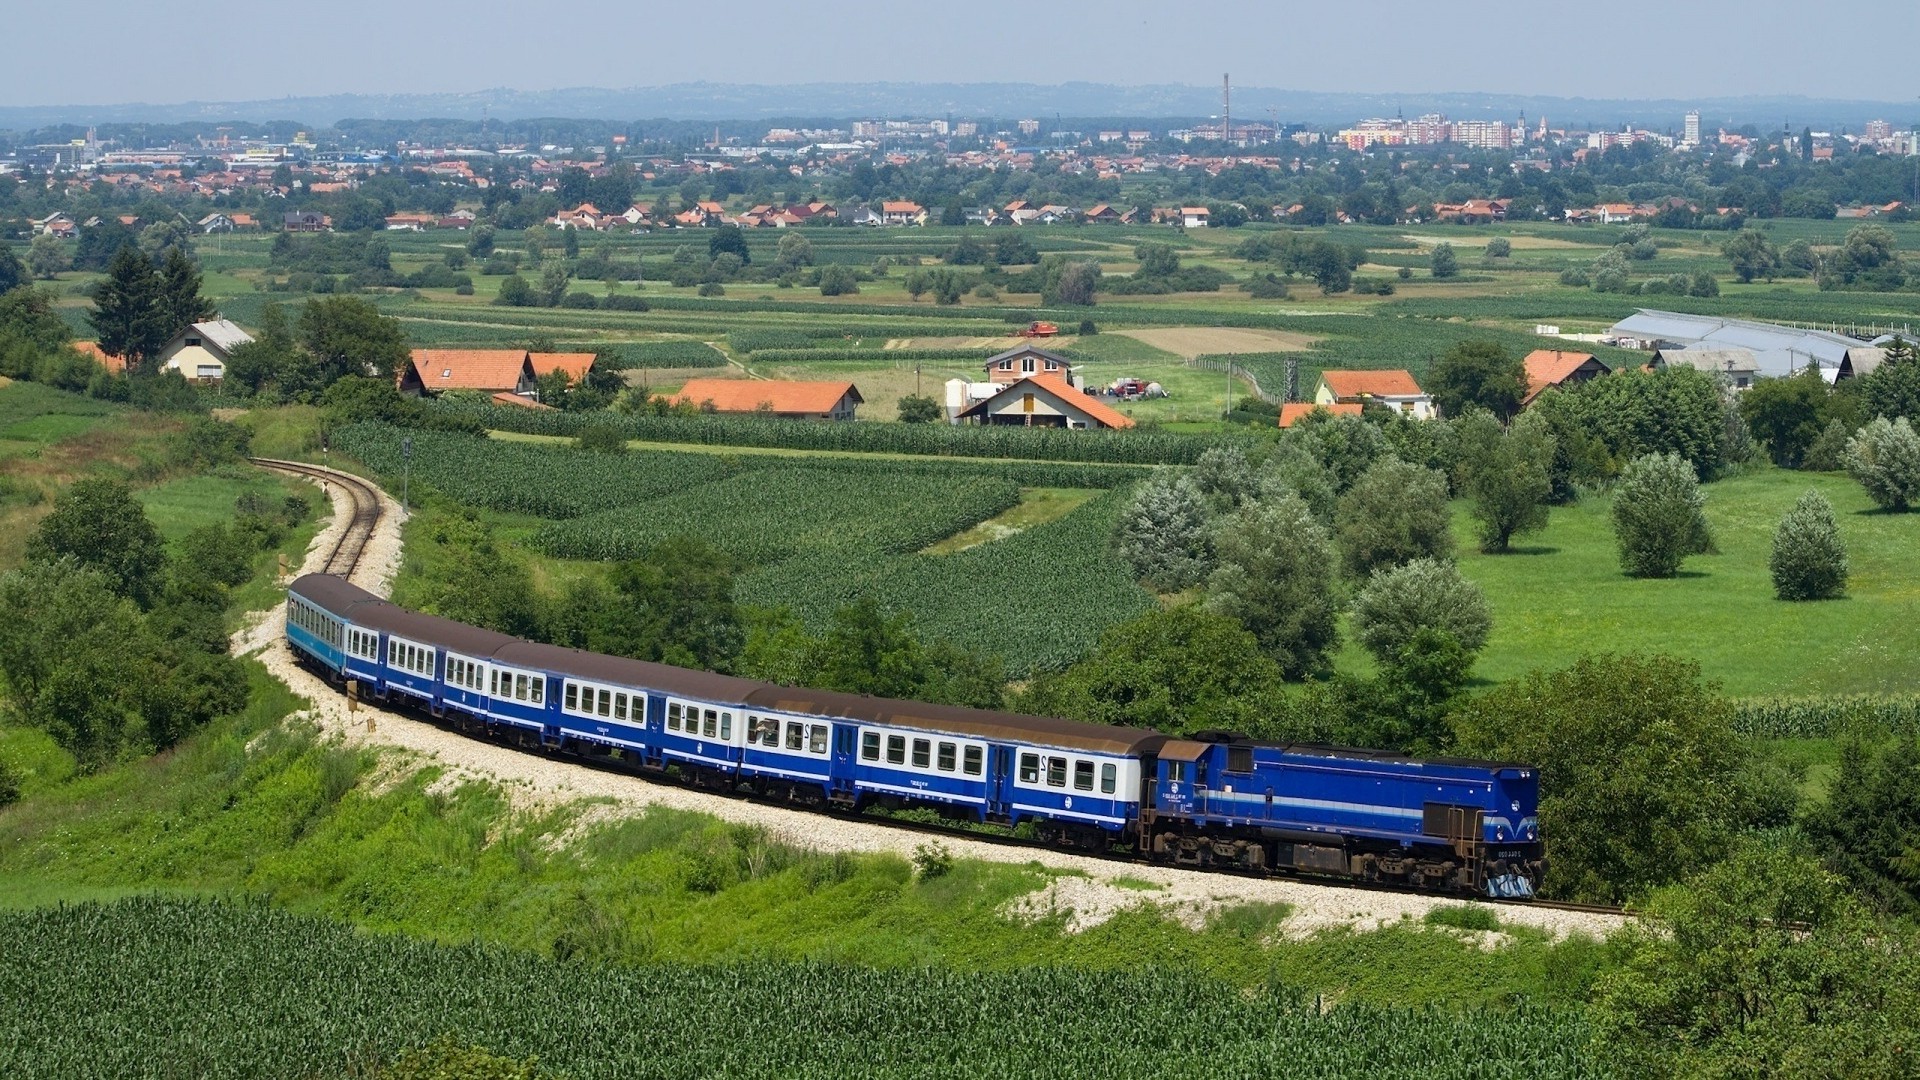 1920x1080 wallpapers: train, structure, blue, fields, summer, outskirts, railway, from above, distance, city (image)